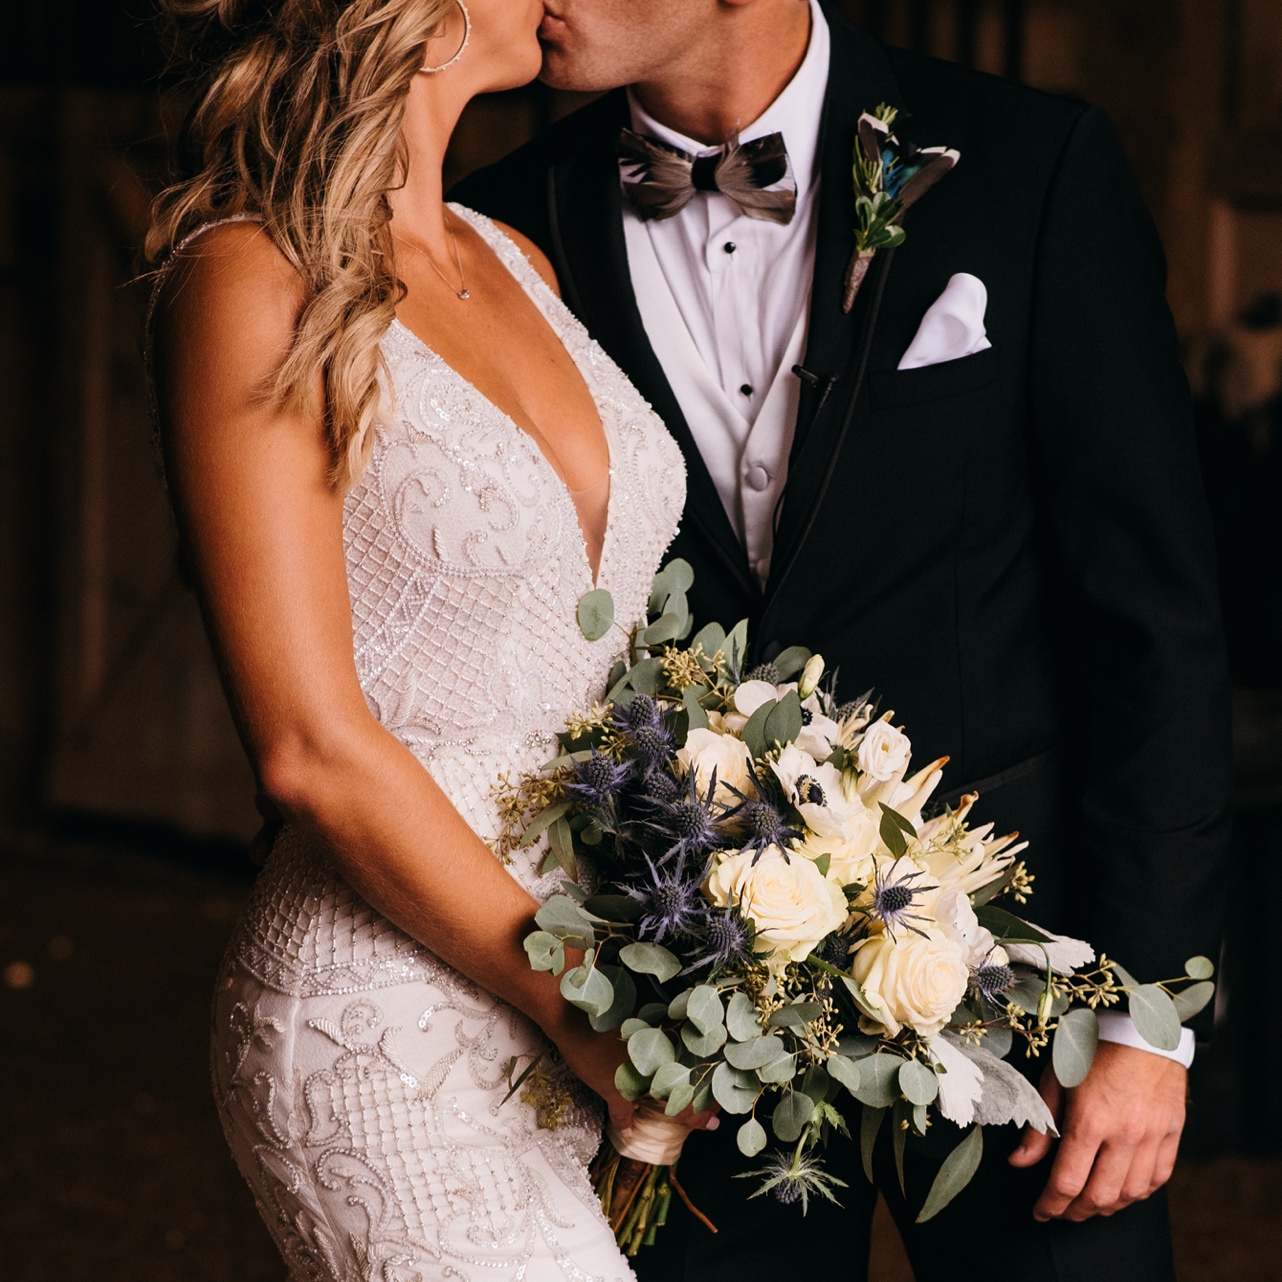 Bride and groom kiss while she holds her lush bouquet.